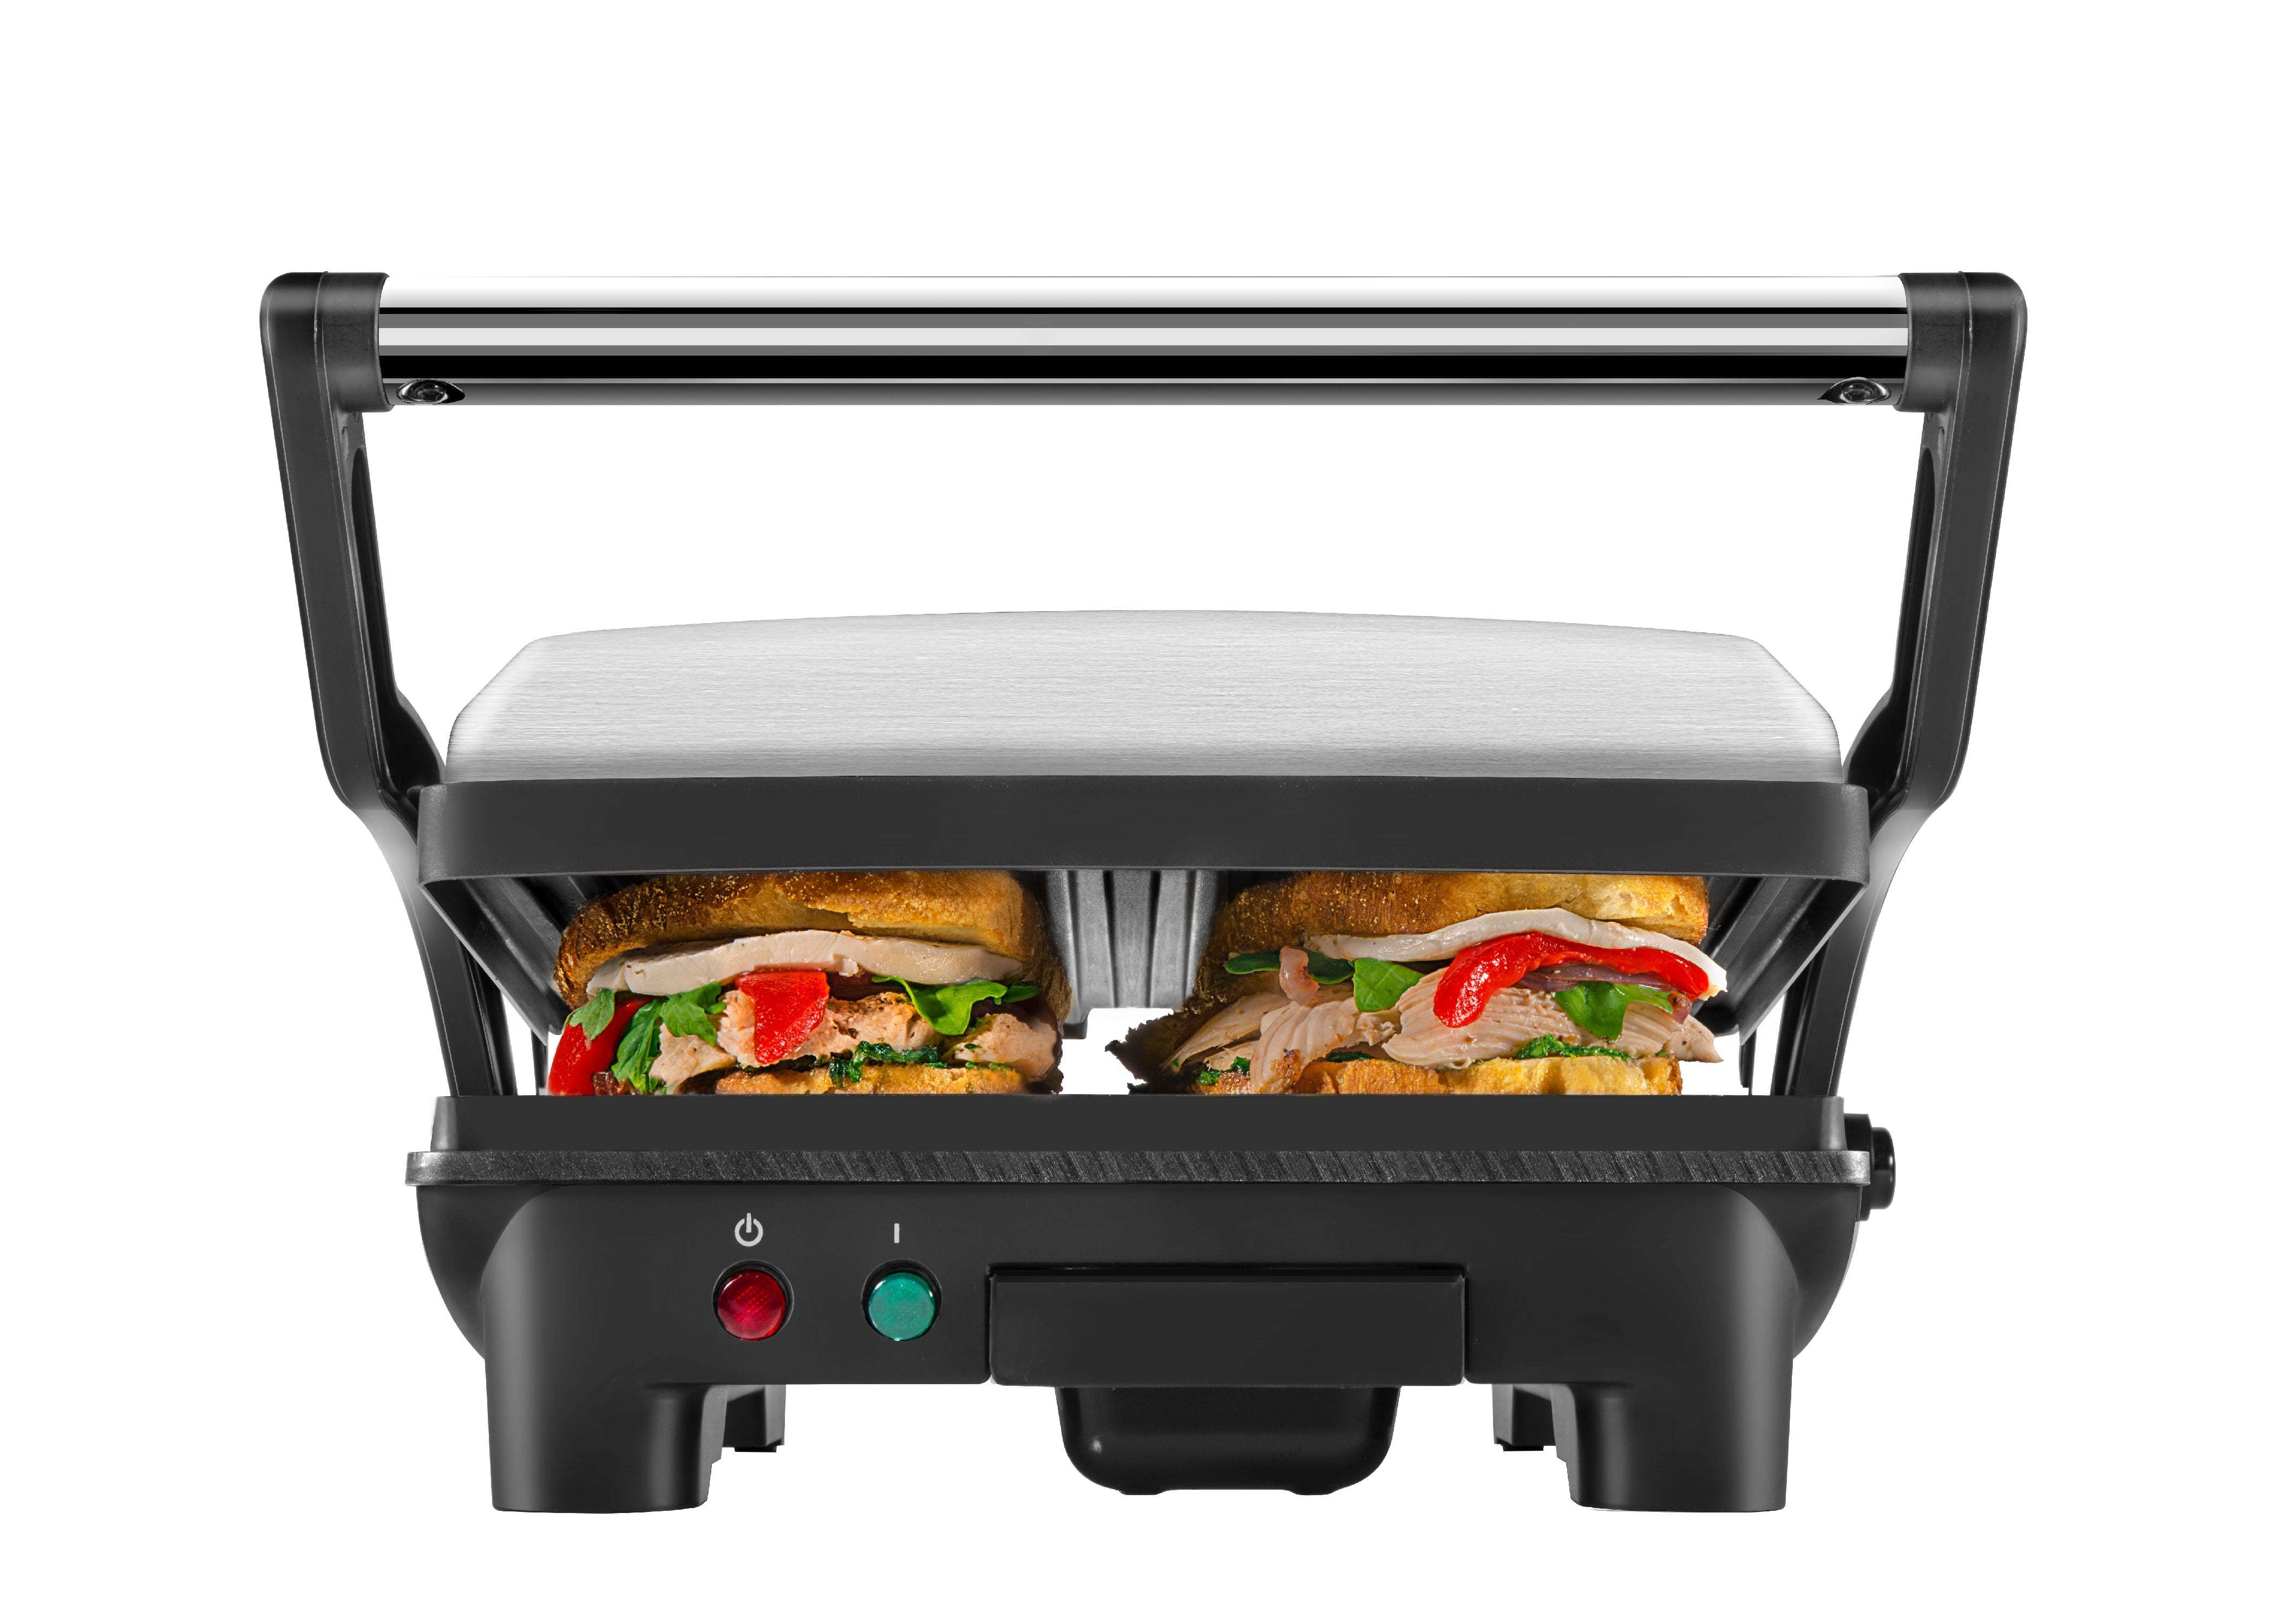 Chefman 5-in-1 Digital Panini Press Grill Sandwich Maker and Griddle Grill  Combo with Removable, Reversible Dishwasher-Safe Grilling Plates, Opens